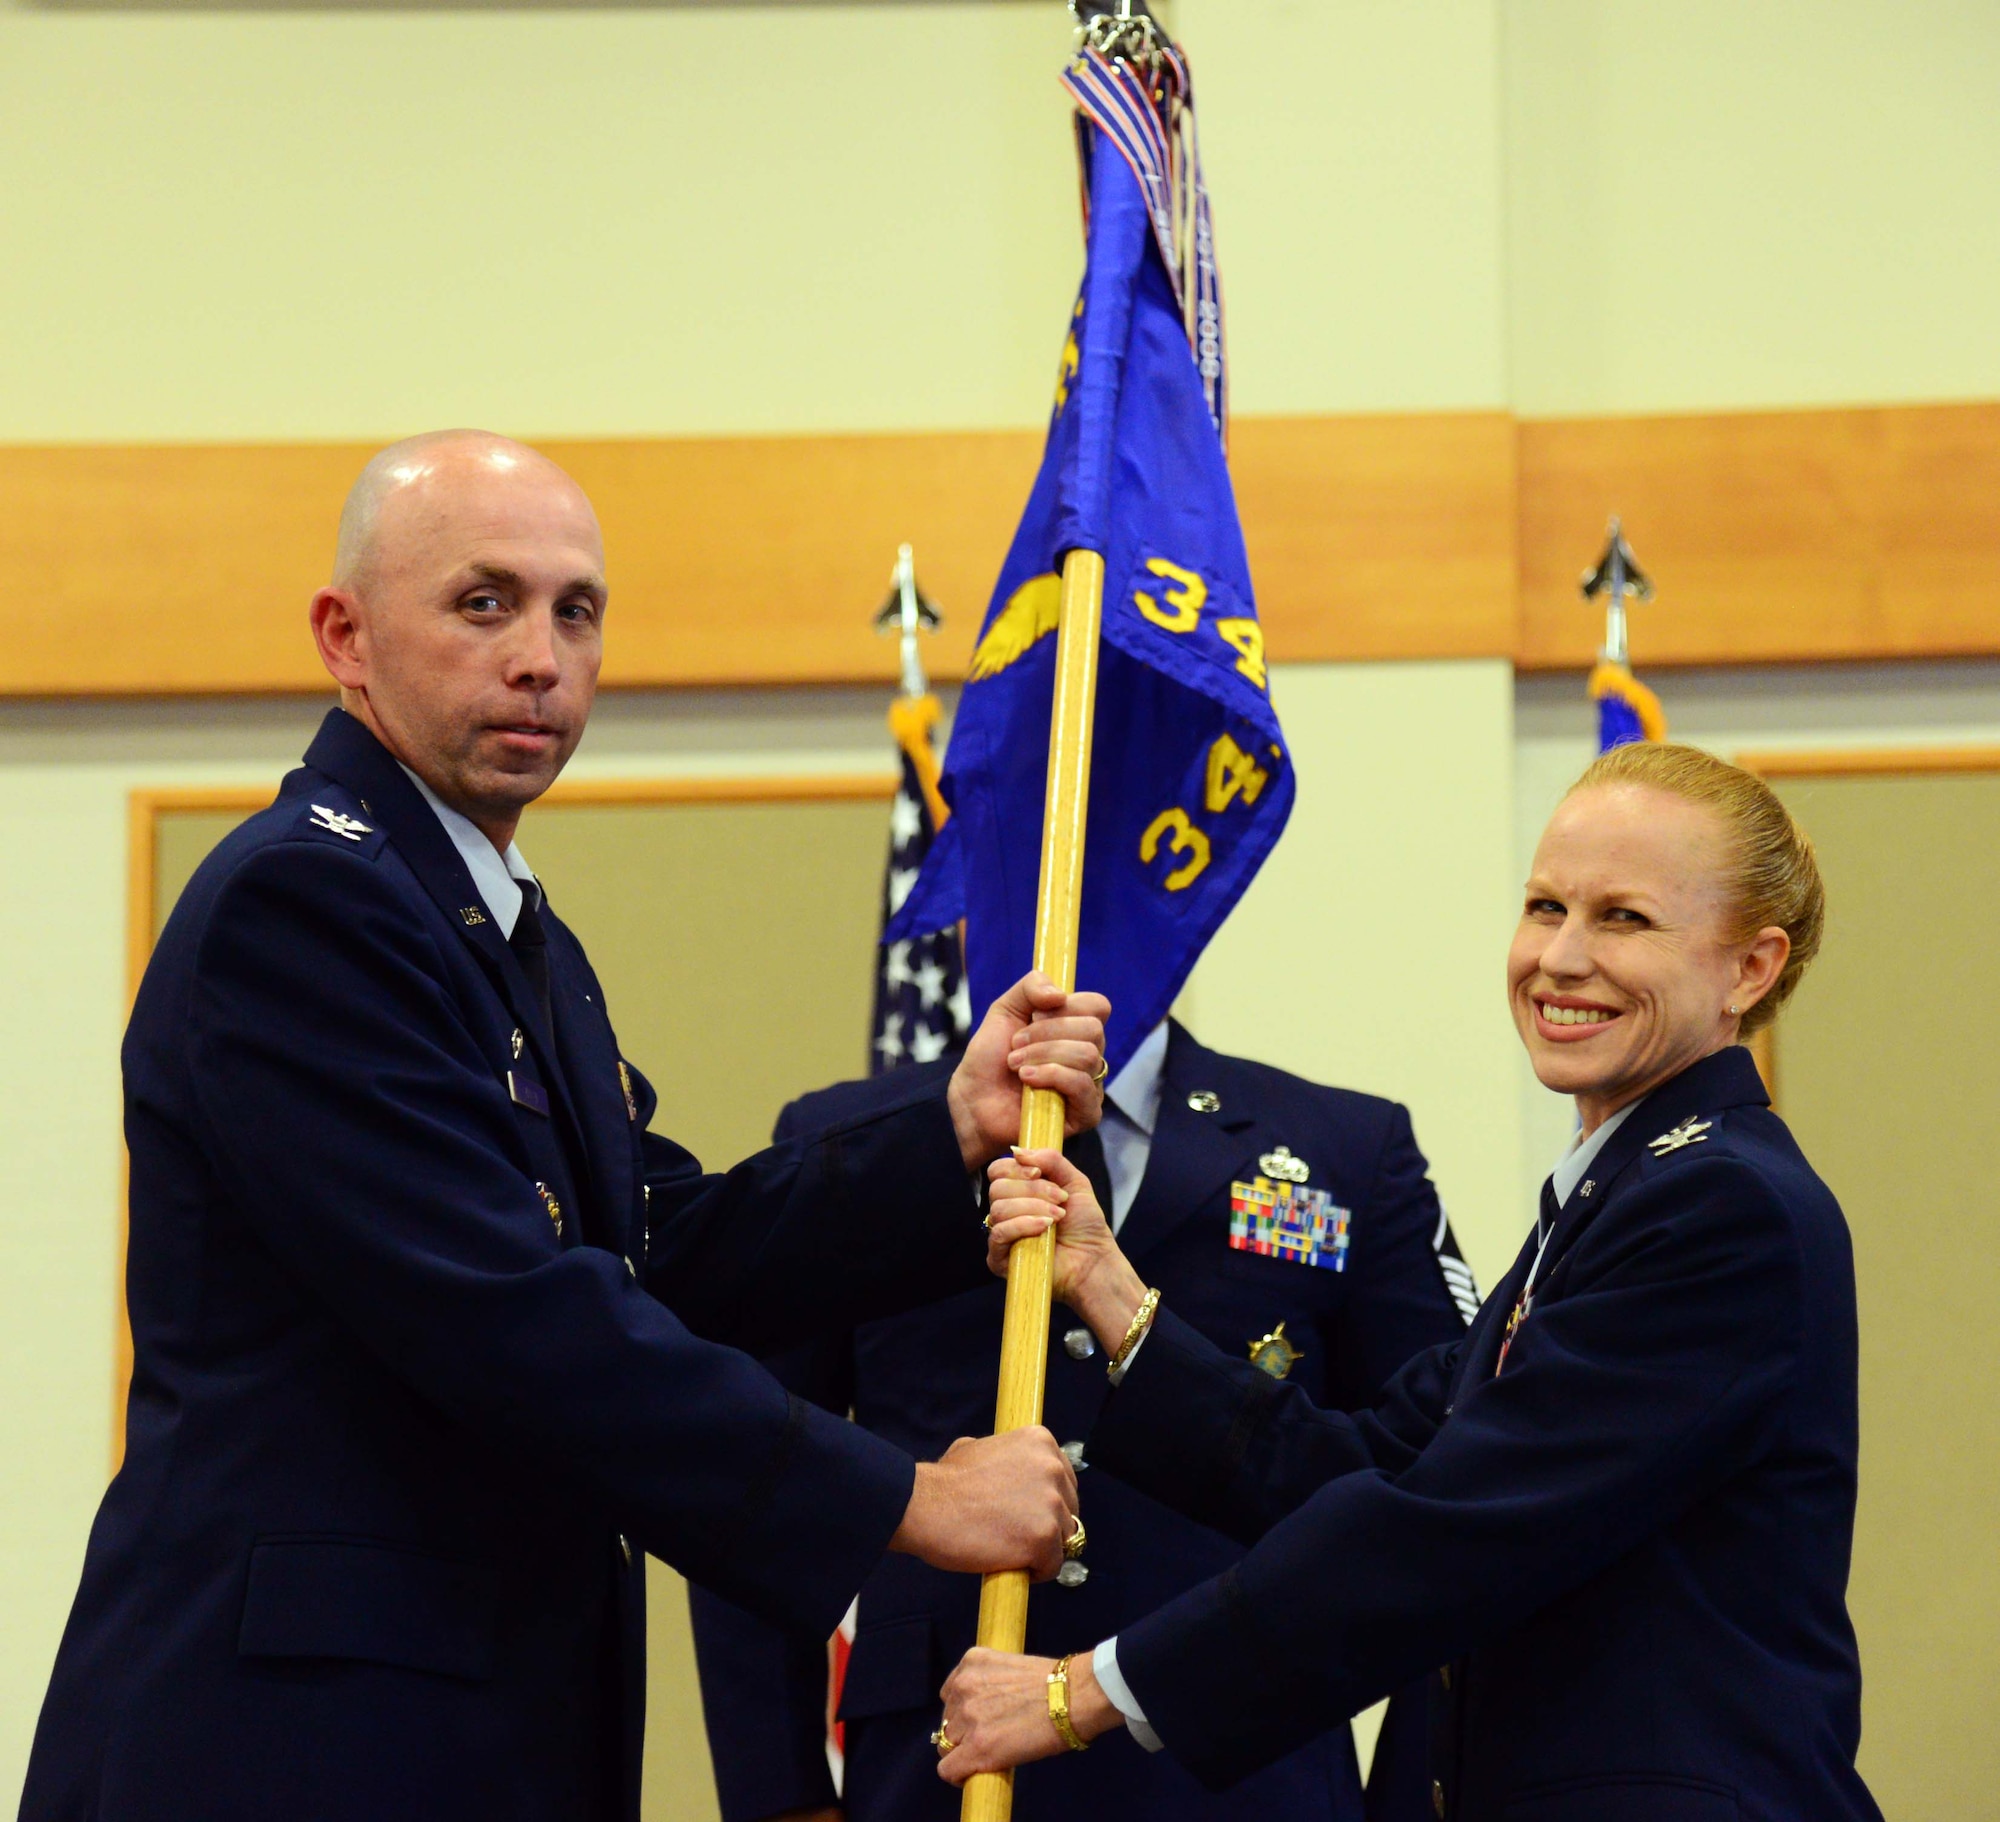 Col. Anita Feugate Opperman, right, accepts command of the 341st Operations Group from Col. Ron Allen, 341st Missile Wing commander, during a change of command ceremony at the Malmstrom Air Force Base Grizzly Bend June 24, 2016. (U.S. Air Force photo/Airman 1st Class Magen M. Reeves)